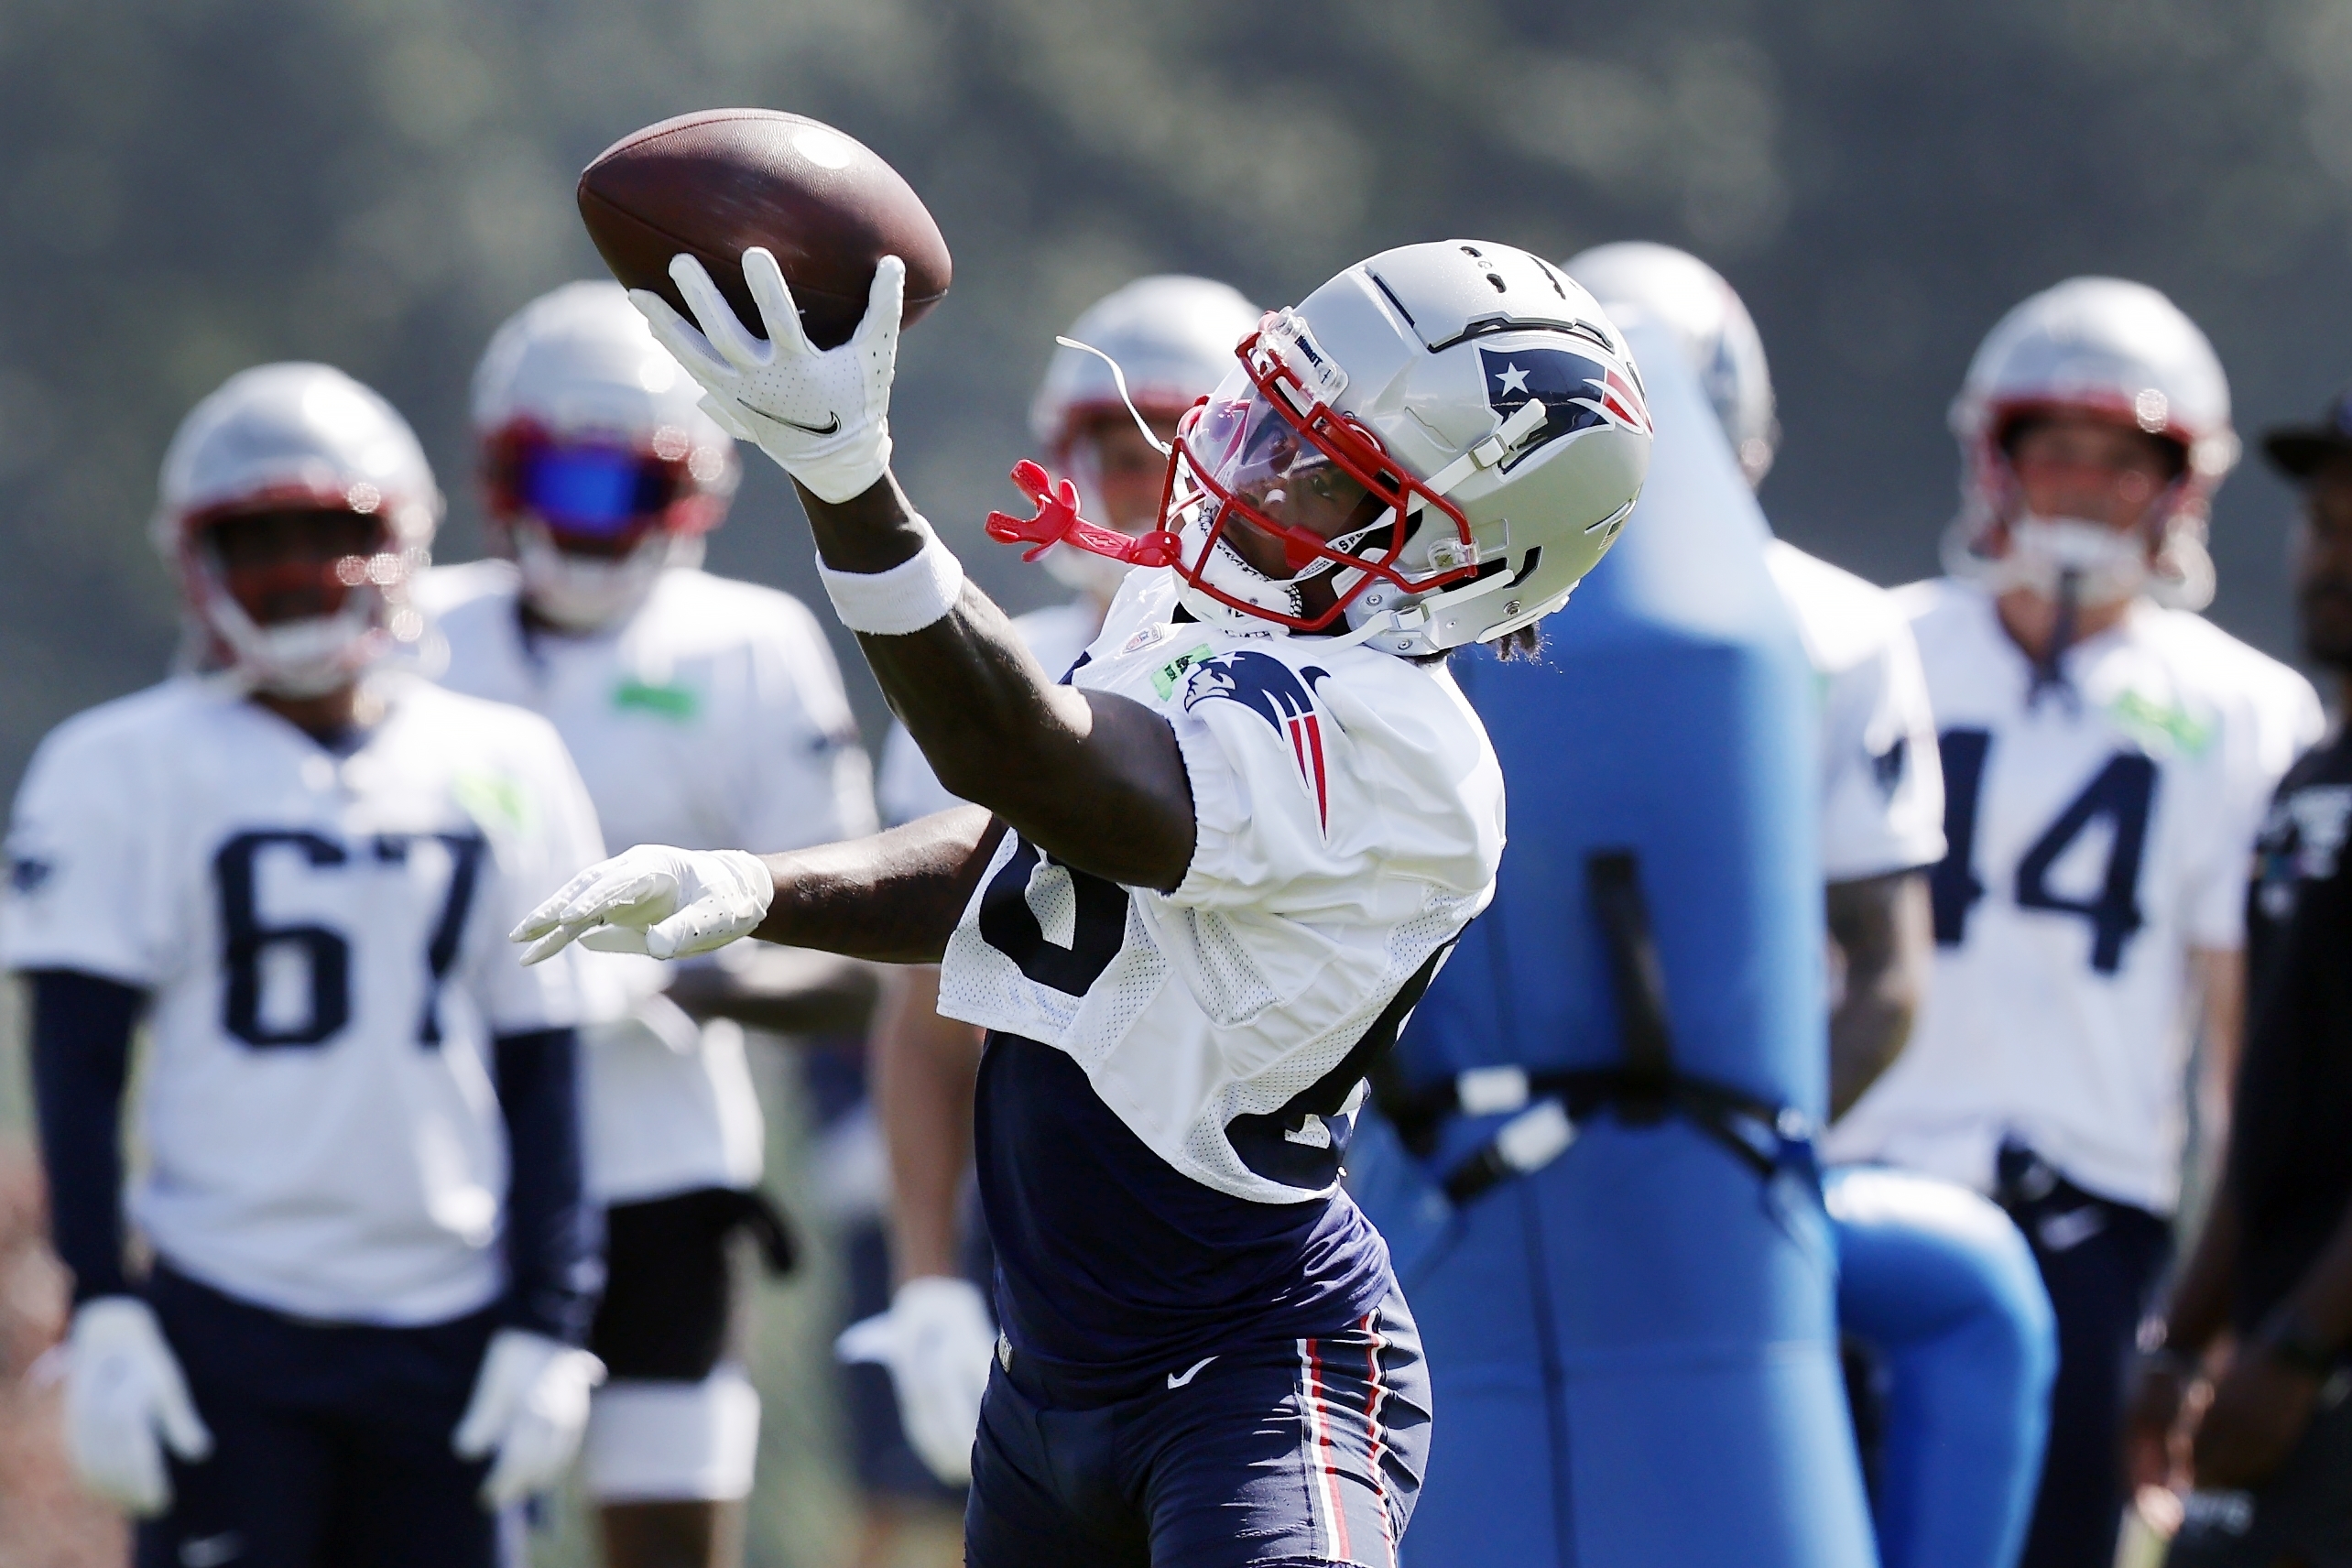 Three NFL training camp battles to watch for Patriots: Can Bailey